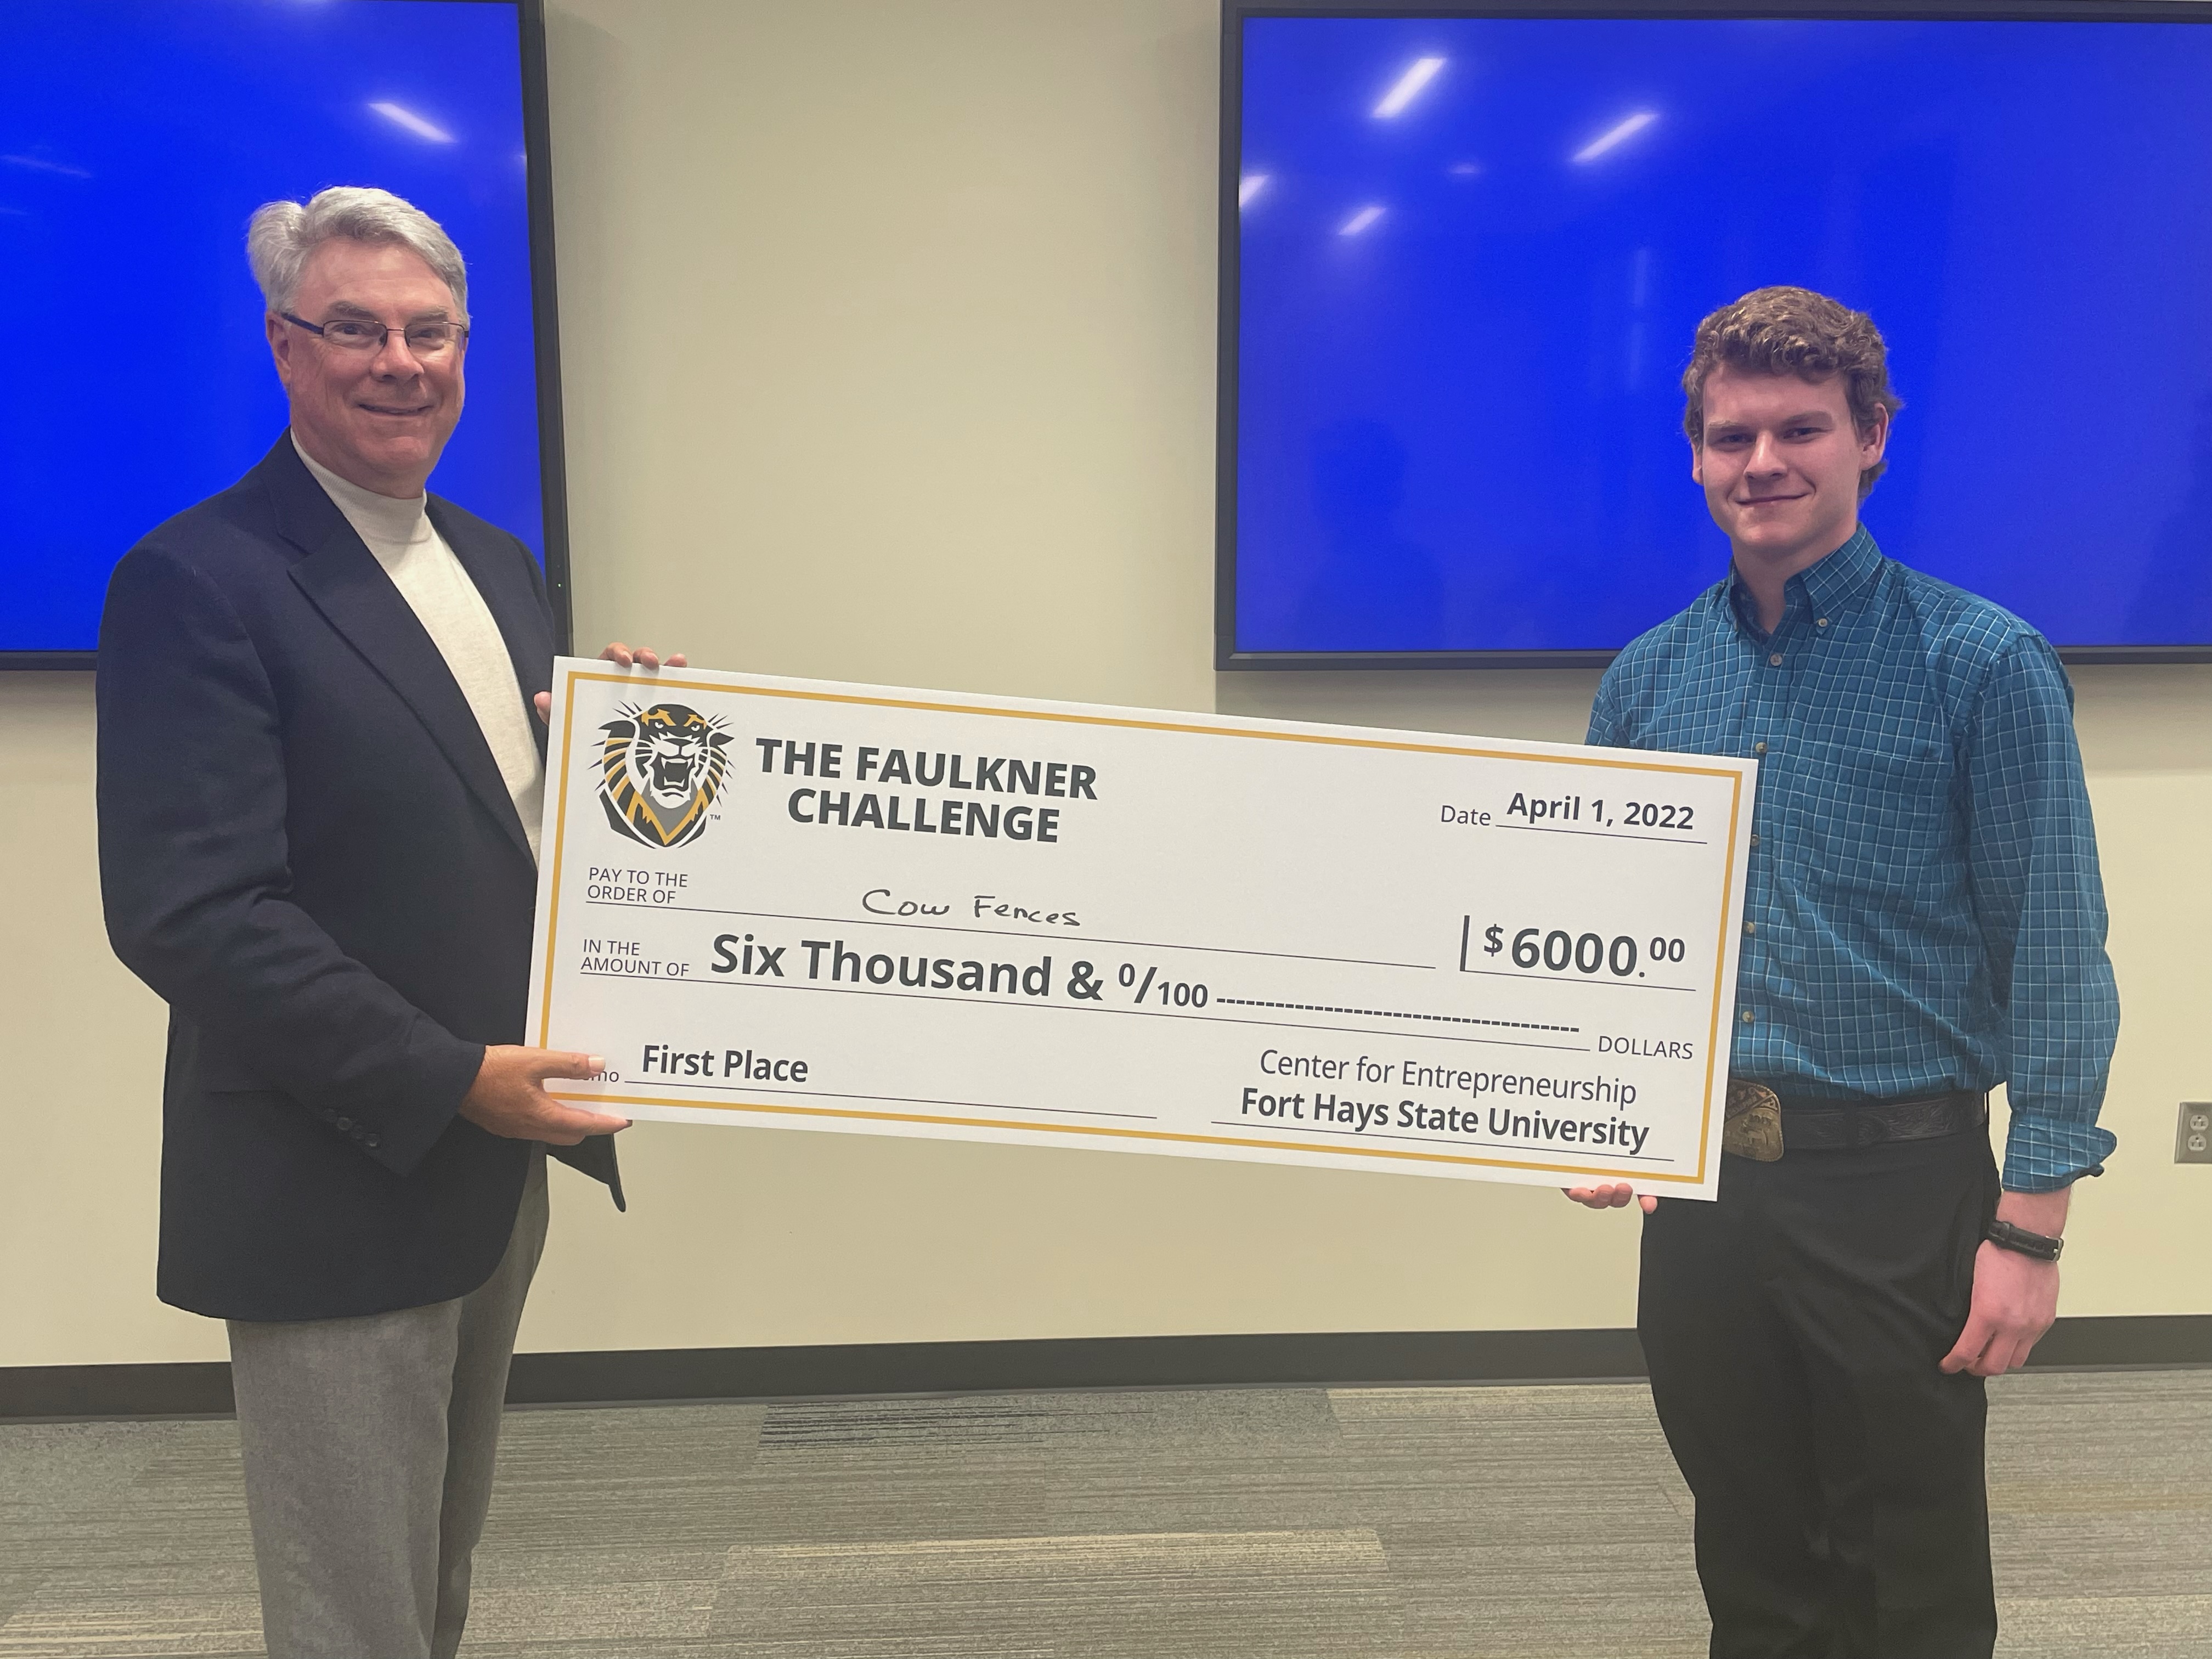 Kevin Faulkner, who wears many hats for FHSU’s Faulkner Challenge, presents Ethan McPherson with the first-place prize of $6,000 at this year’s challenge finals.